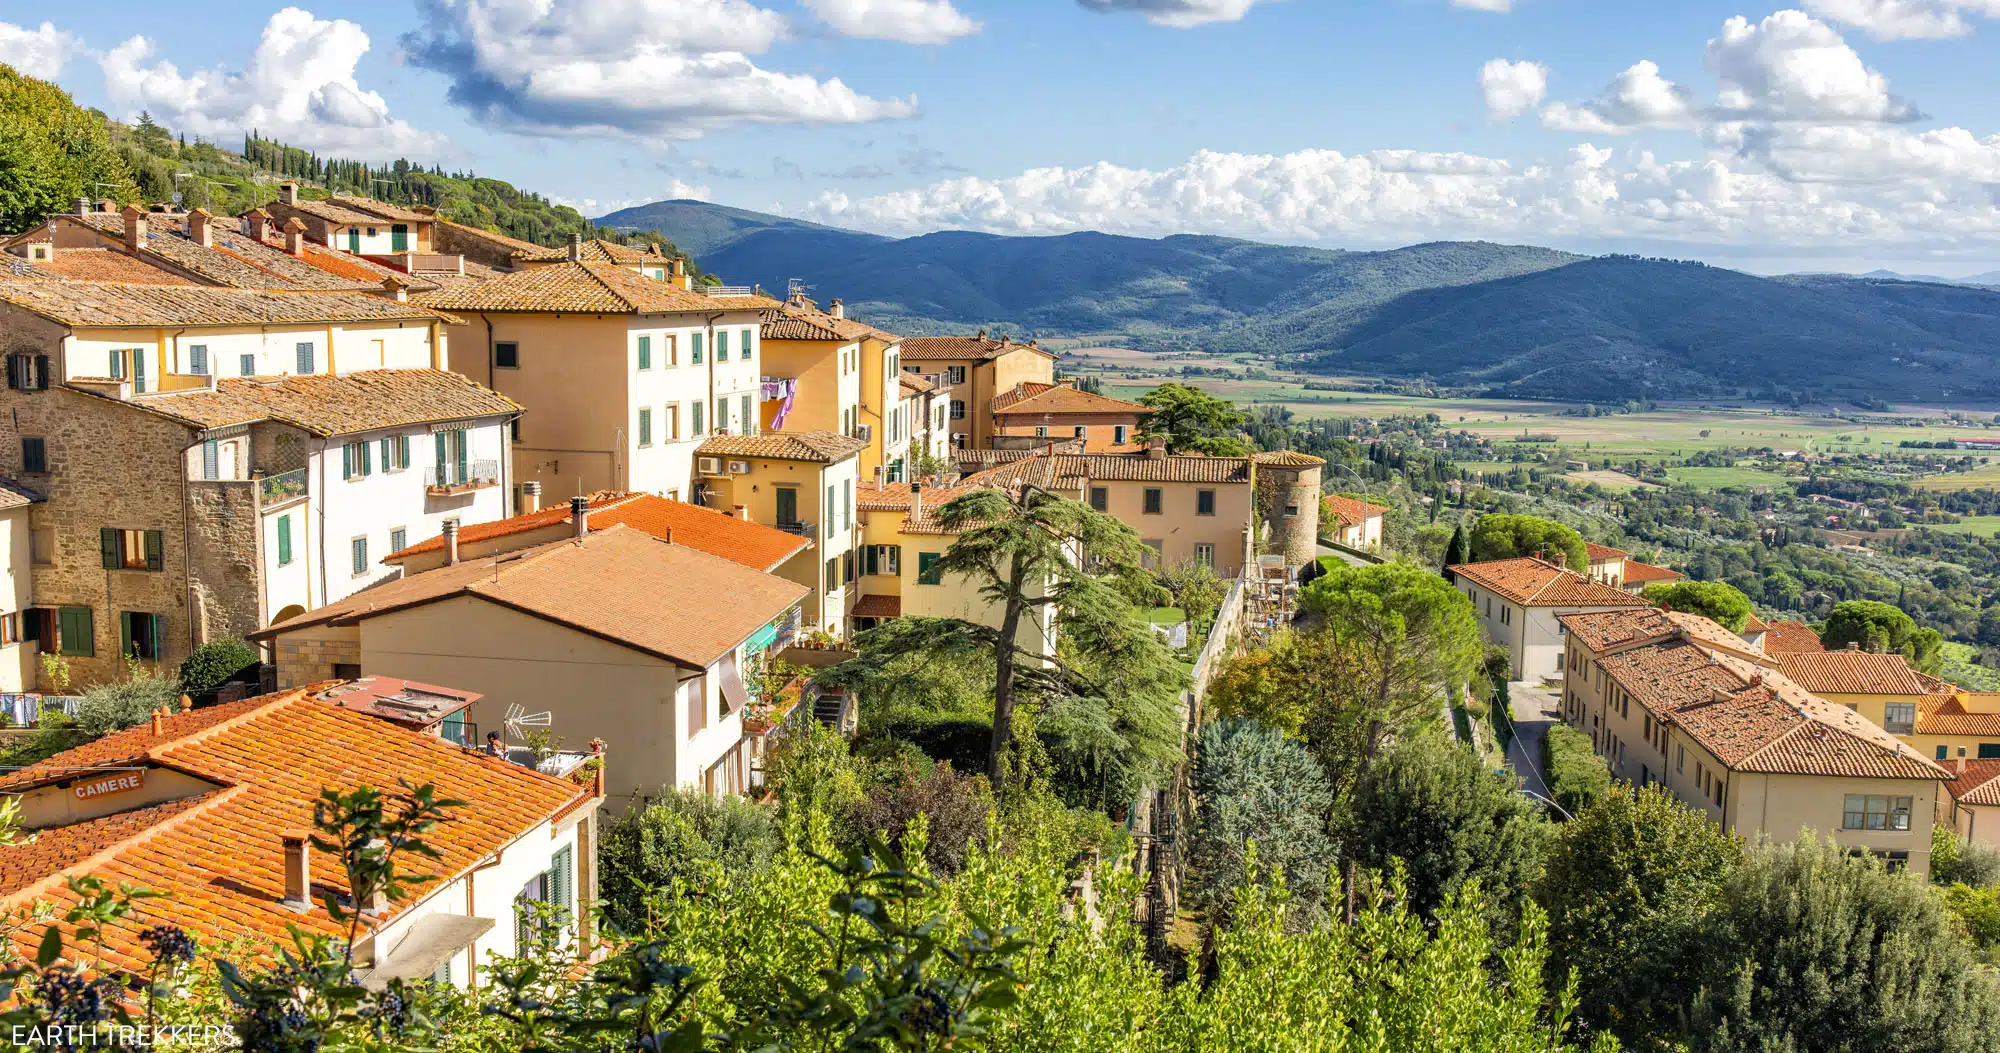 Featured image for “15 Best Things to Do in Cortona, Italy (+ HELPFUL Tips & Photos)”